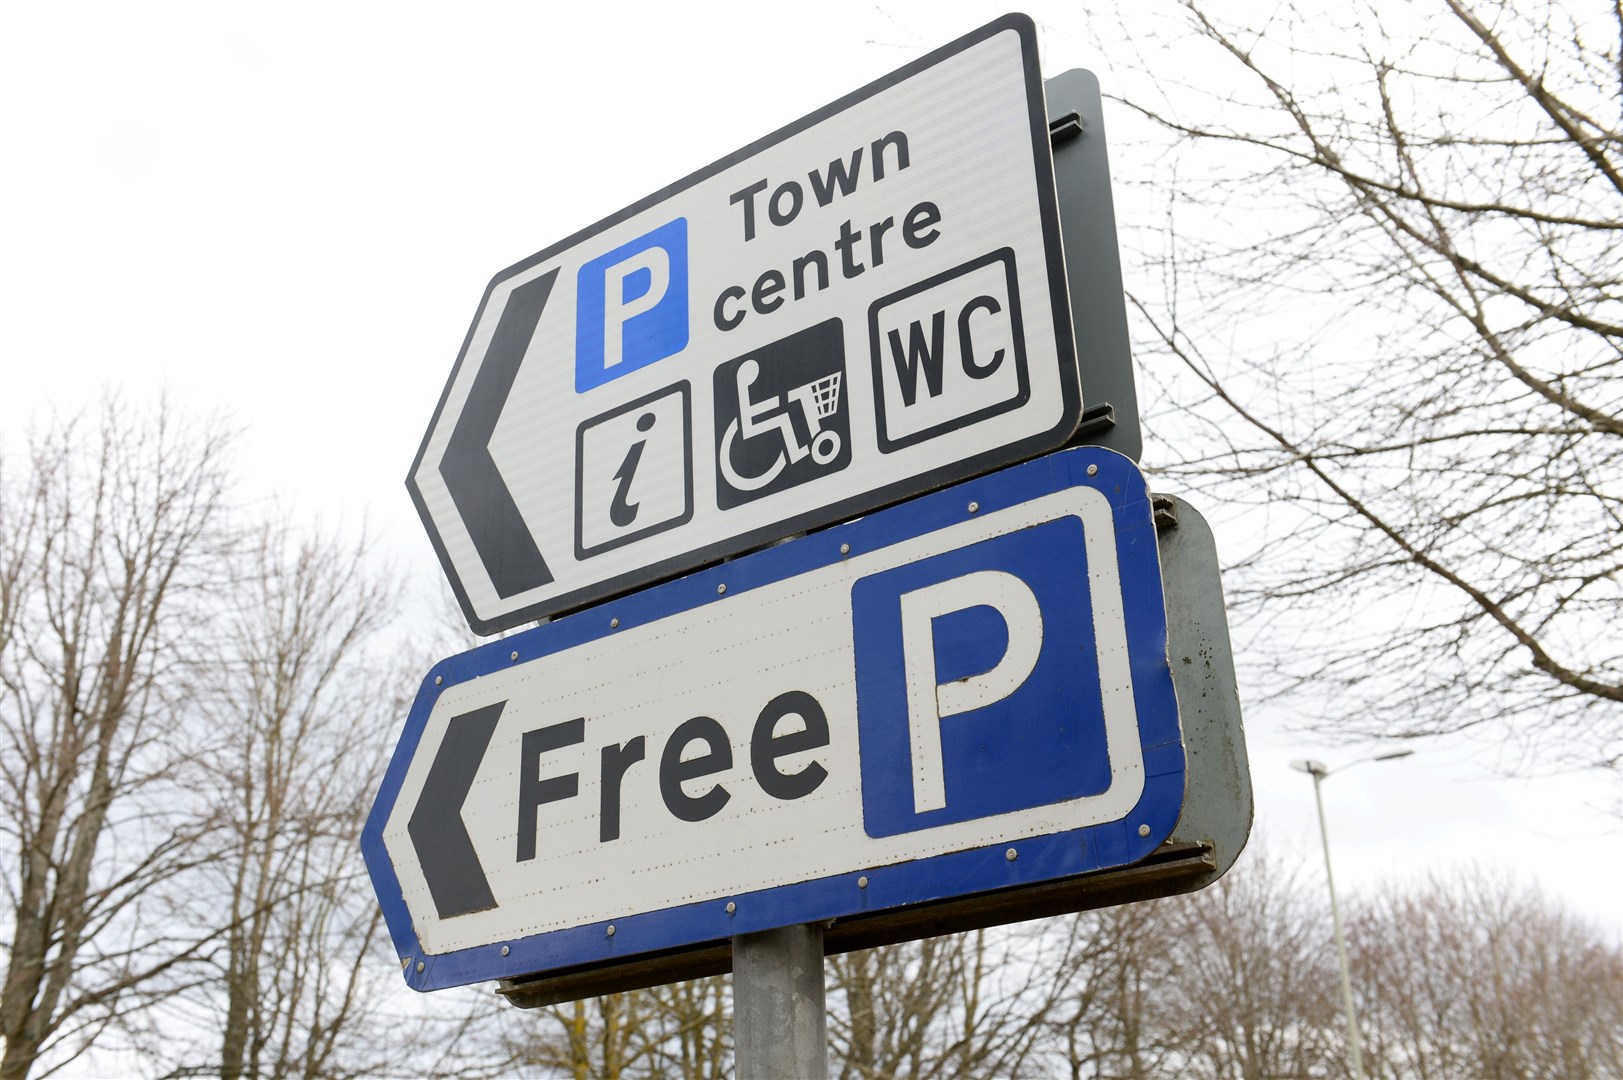 Off-street car parking charges are being explored in parts of the Highlands.